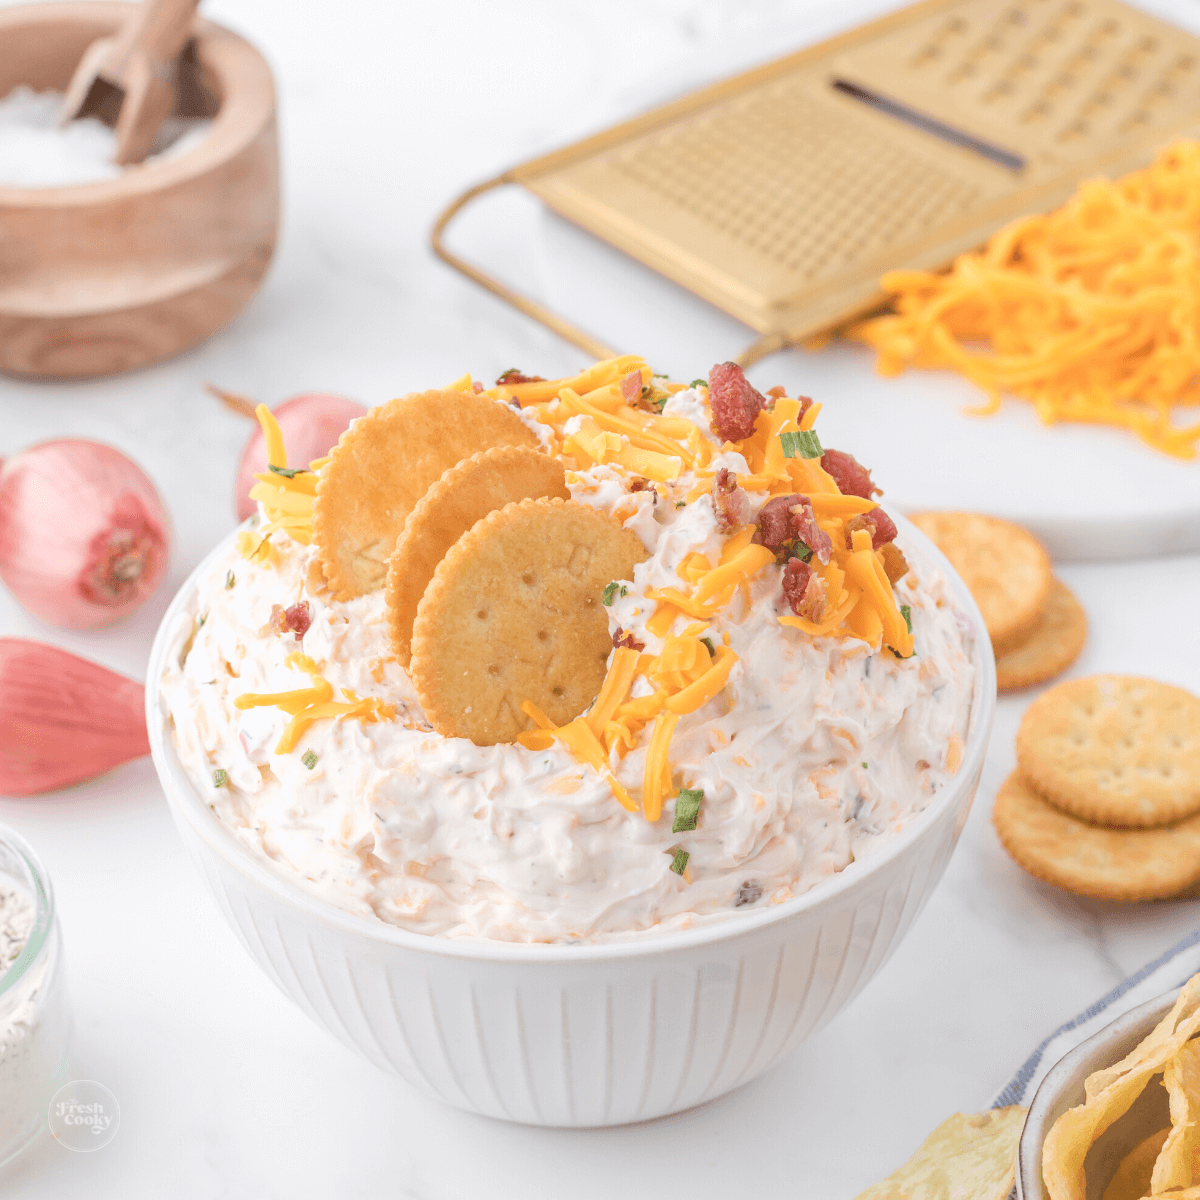 10 Homemade Dips for Chips, Crackers, and Veggies